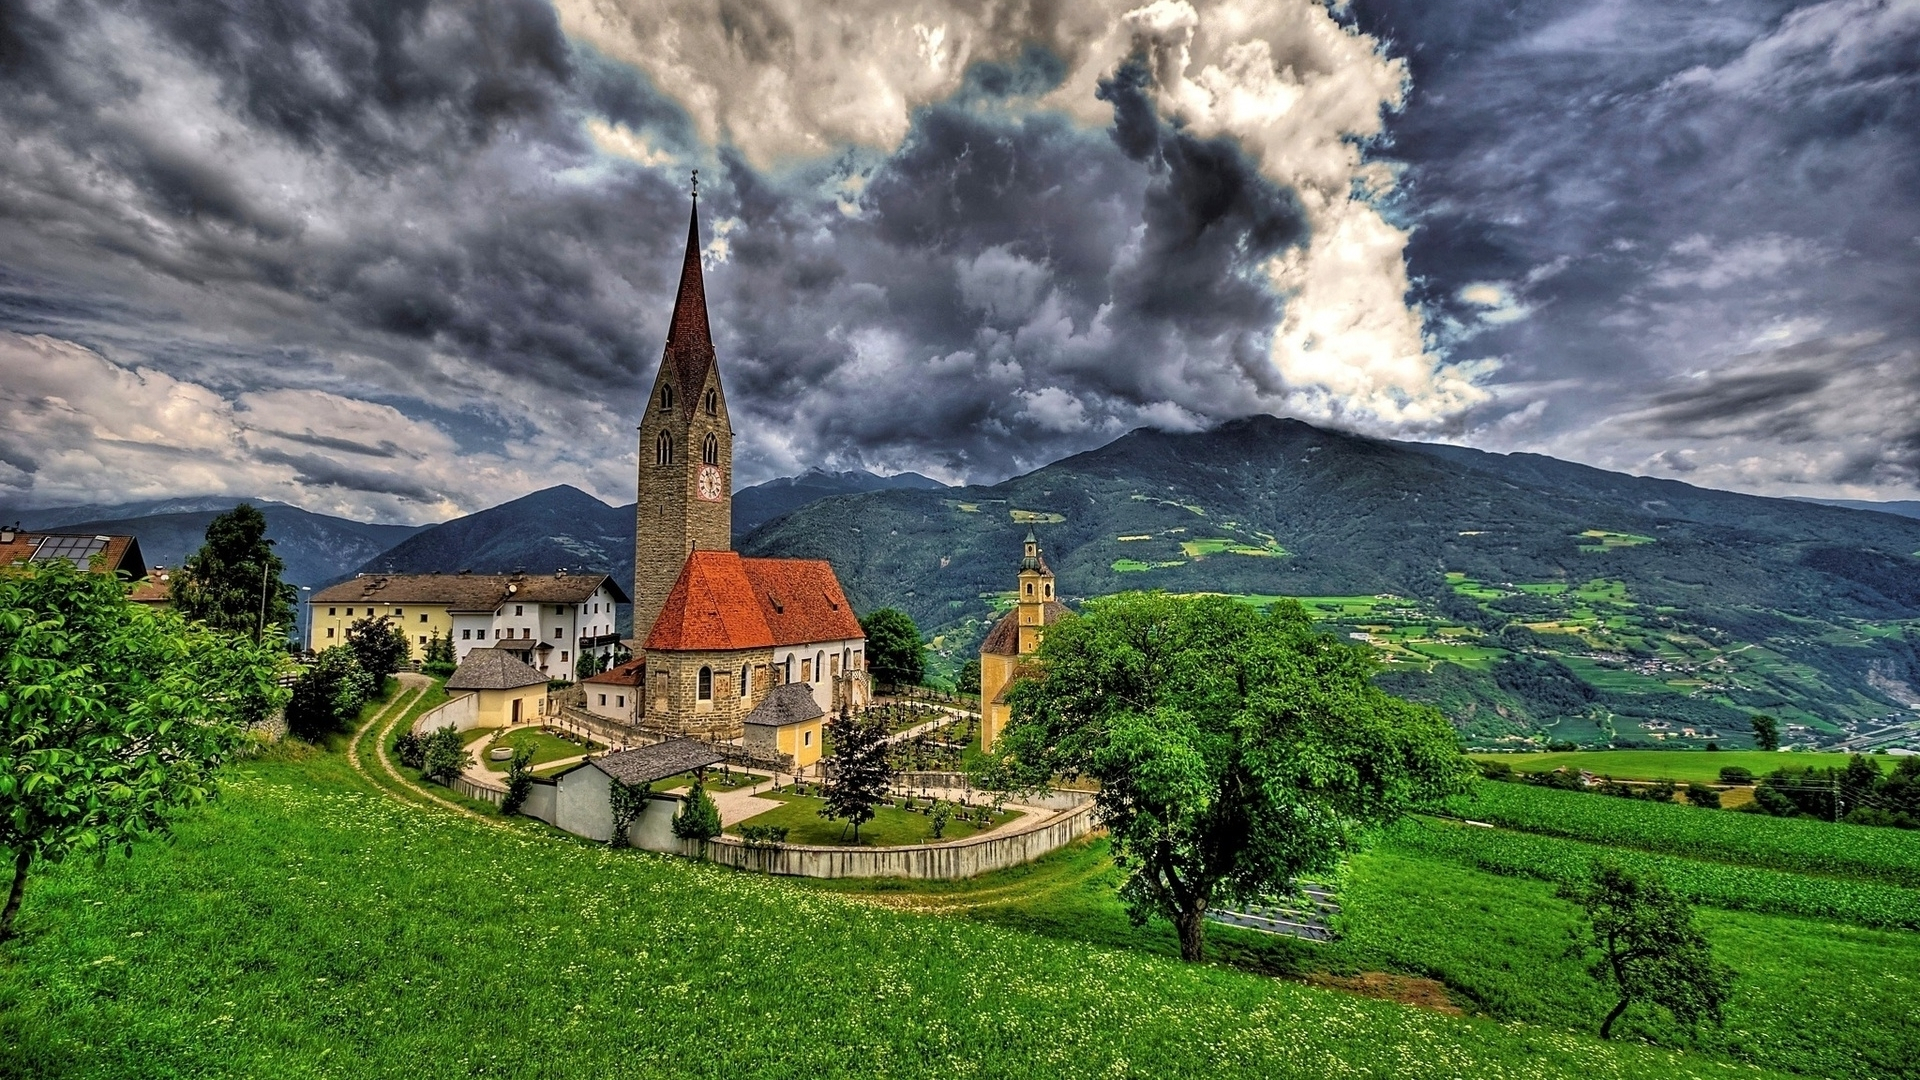 Download mobile wallpaper Landscape, Architecture, Italy, Mountain, House, Village, Cloud, Church, Man Made for free.